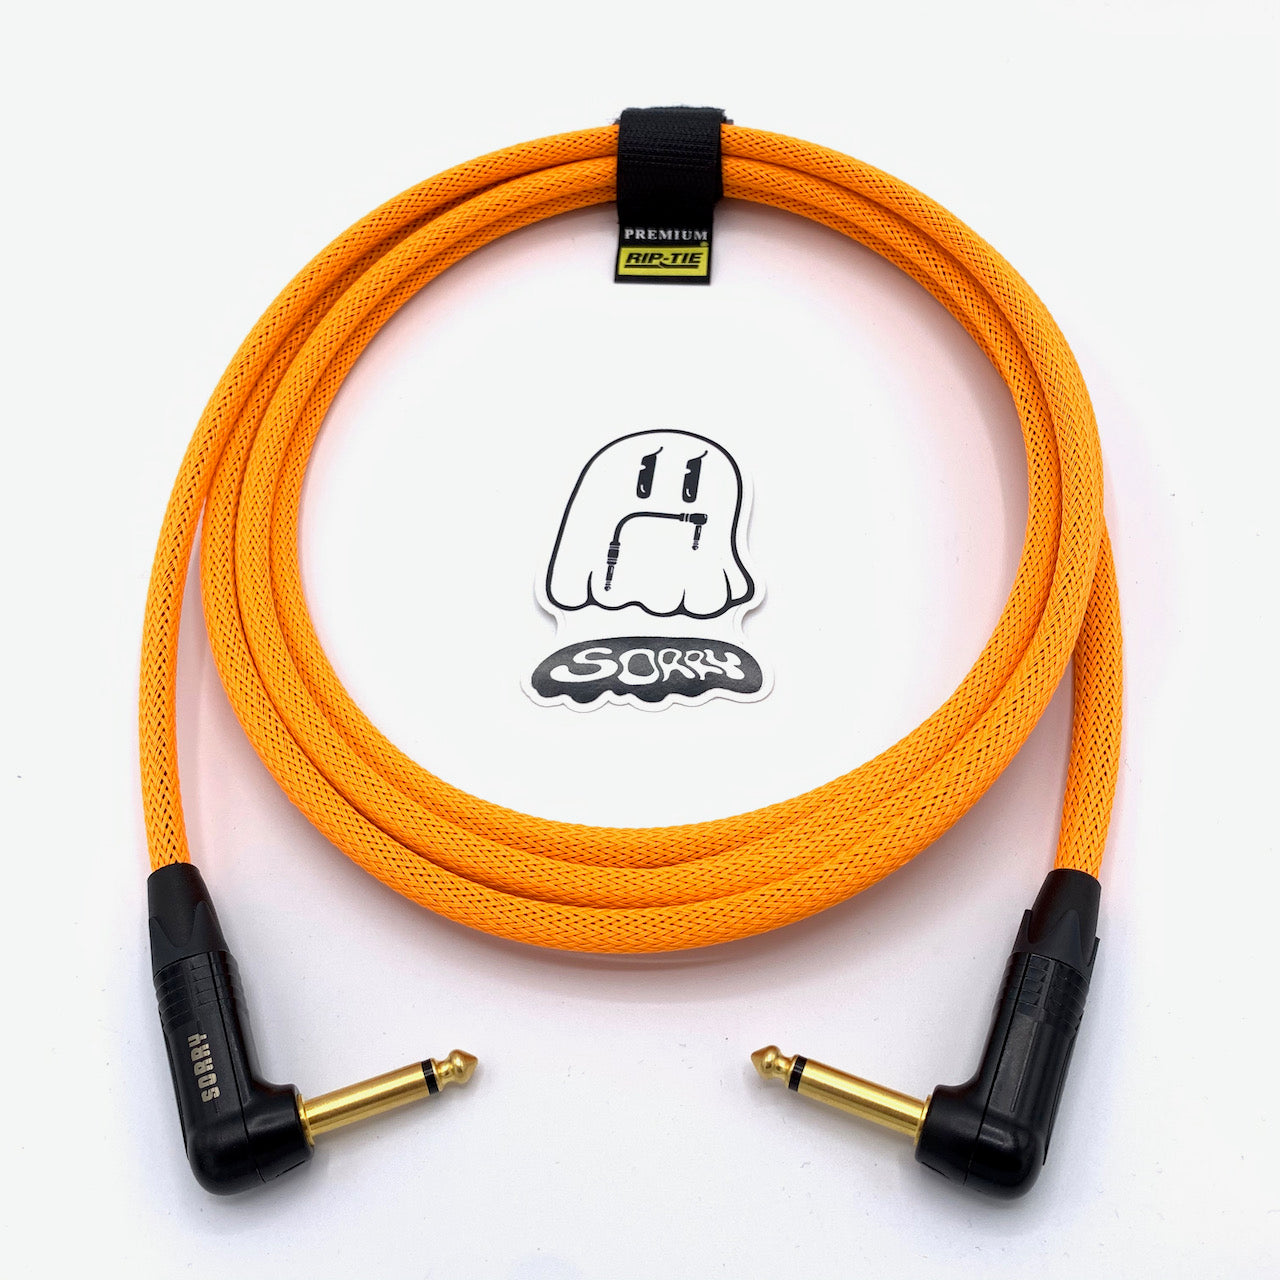 SORRY Right Angle to Right Angle Guitar / Instrument Cable - Neon Orange